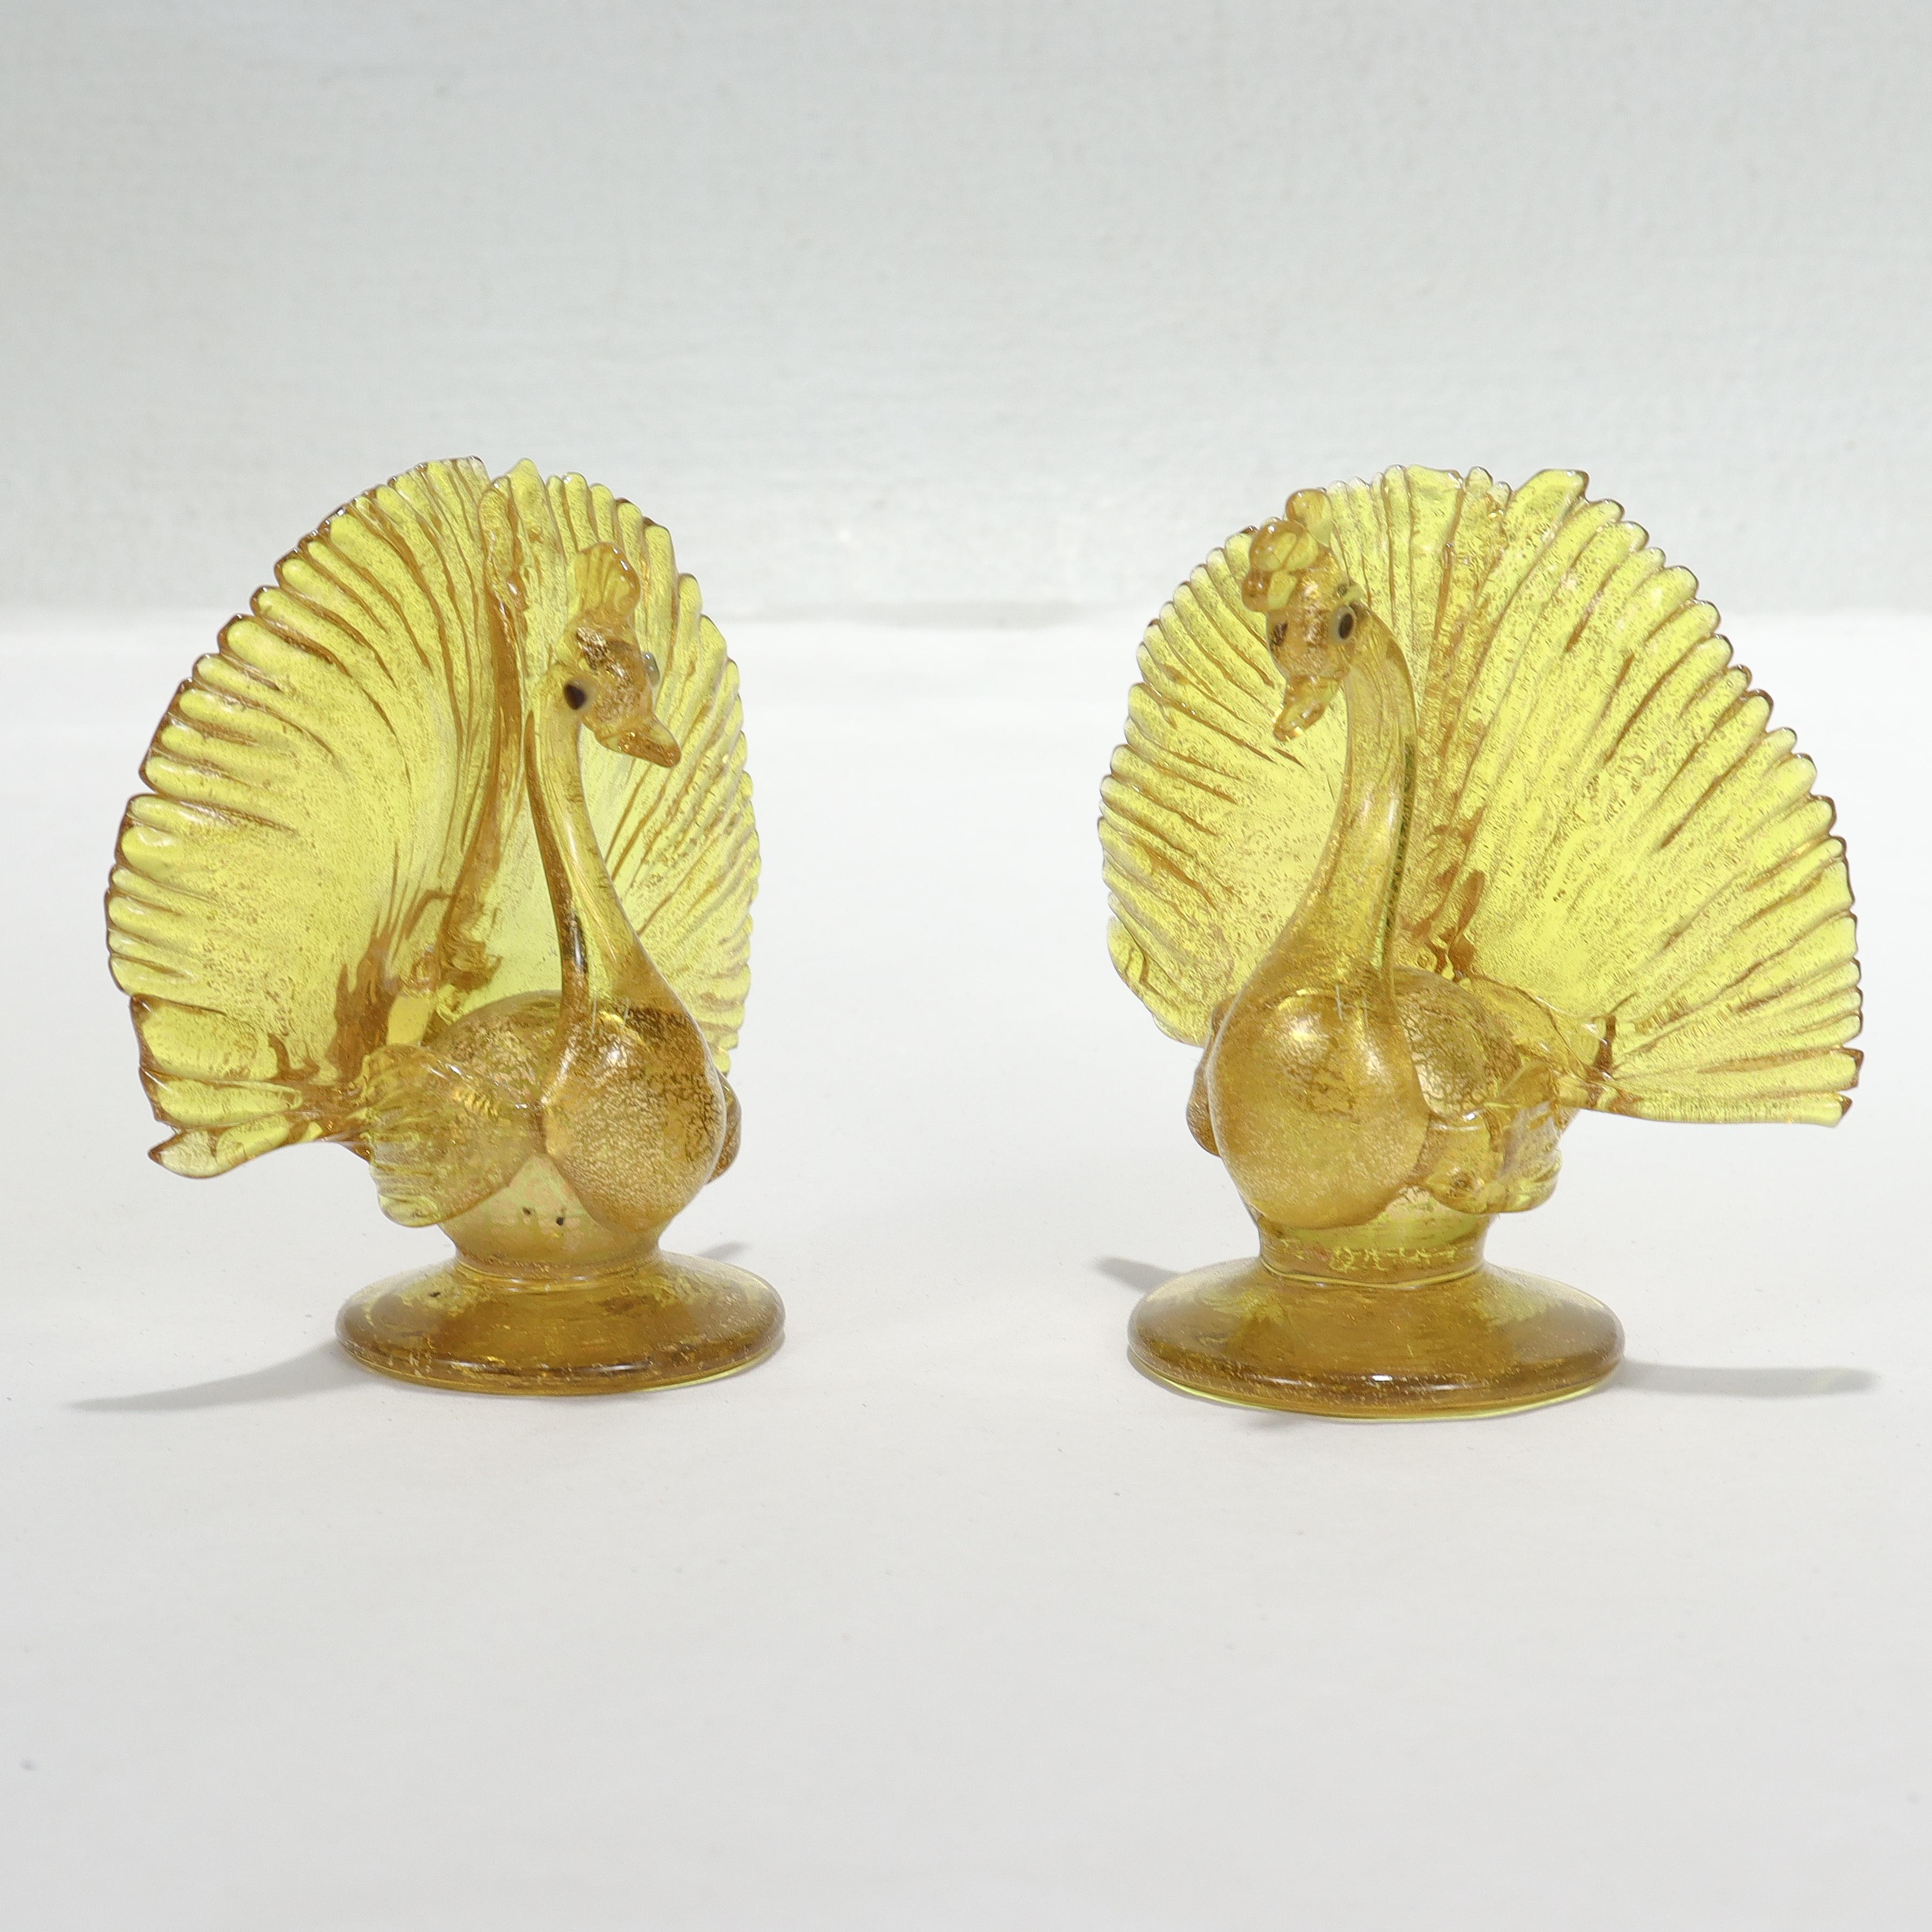 A Fine pair of Venetian or Murano glass figurines or place card holders.

In the form of peacocks in yellow glass with gold foil with dark blue eyes.

Attributed to Salviati.

Simply a wonderful pair of Venetian or Murano glass